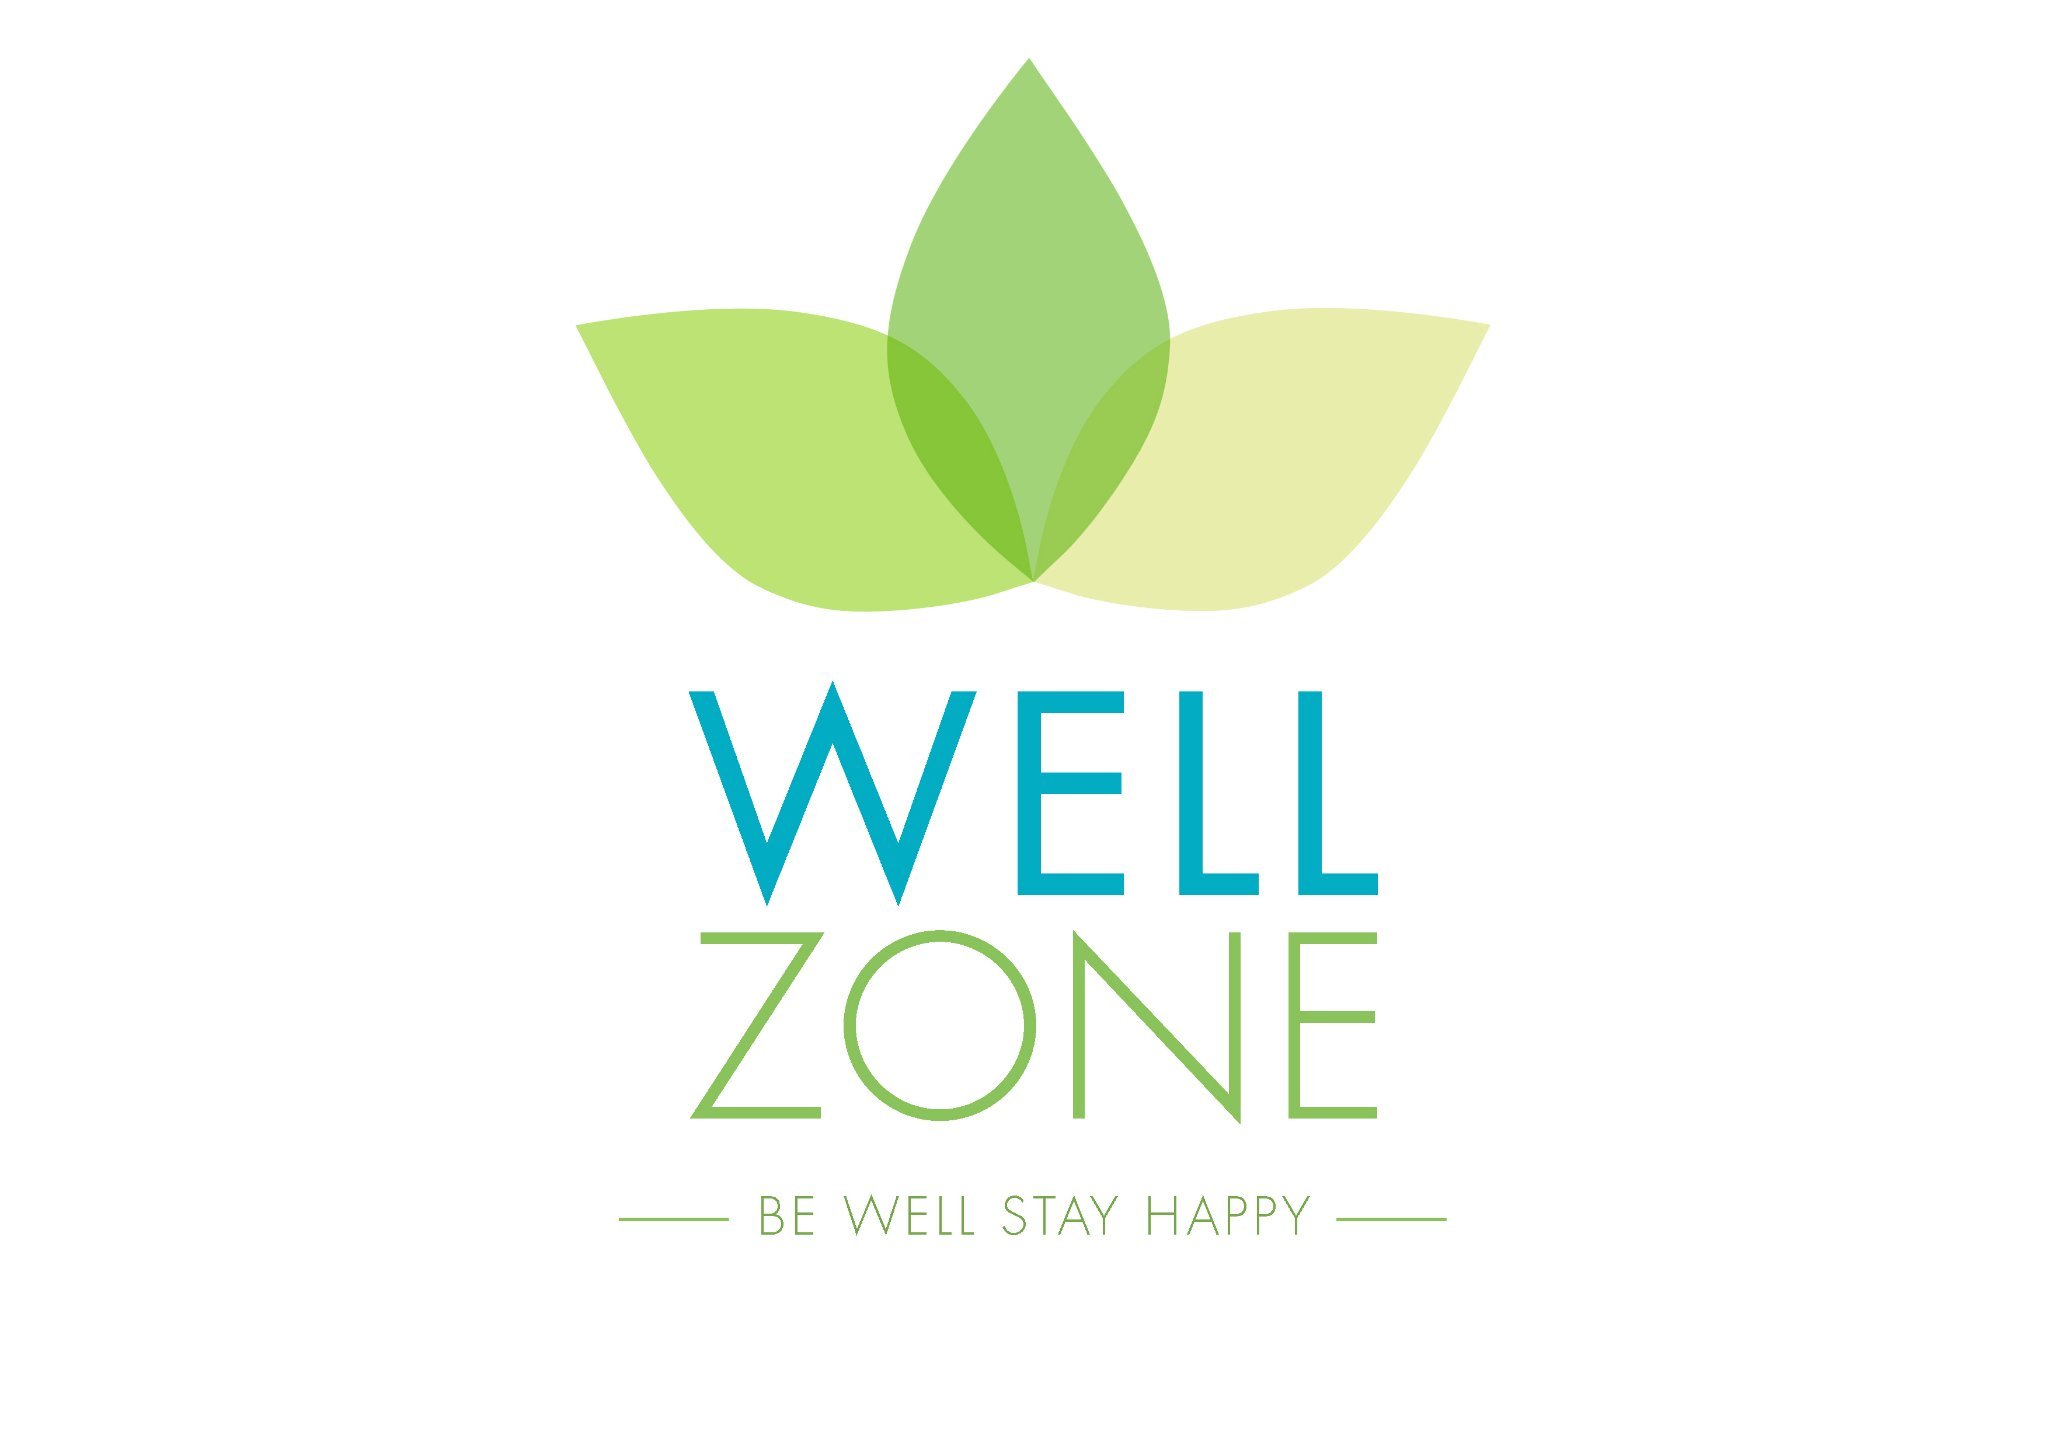 Well Zone is a Bath (UK) based company supplying the highest quality, all natural CBD Products. All of our CBD is Full Spectrum, Lab Tested and UK Grown.